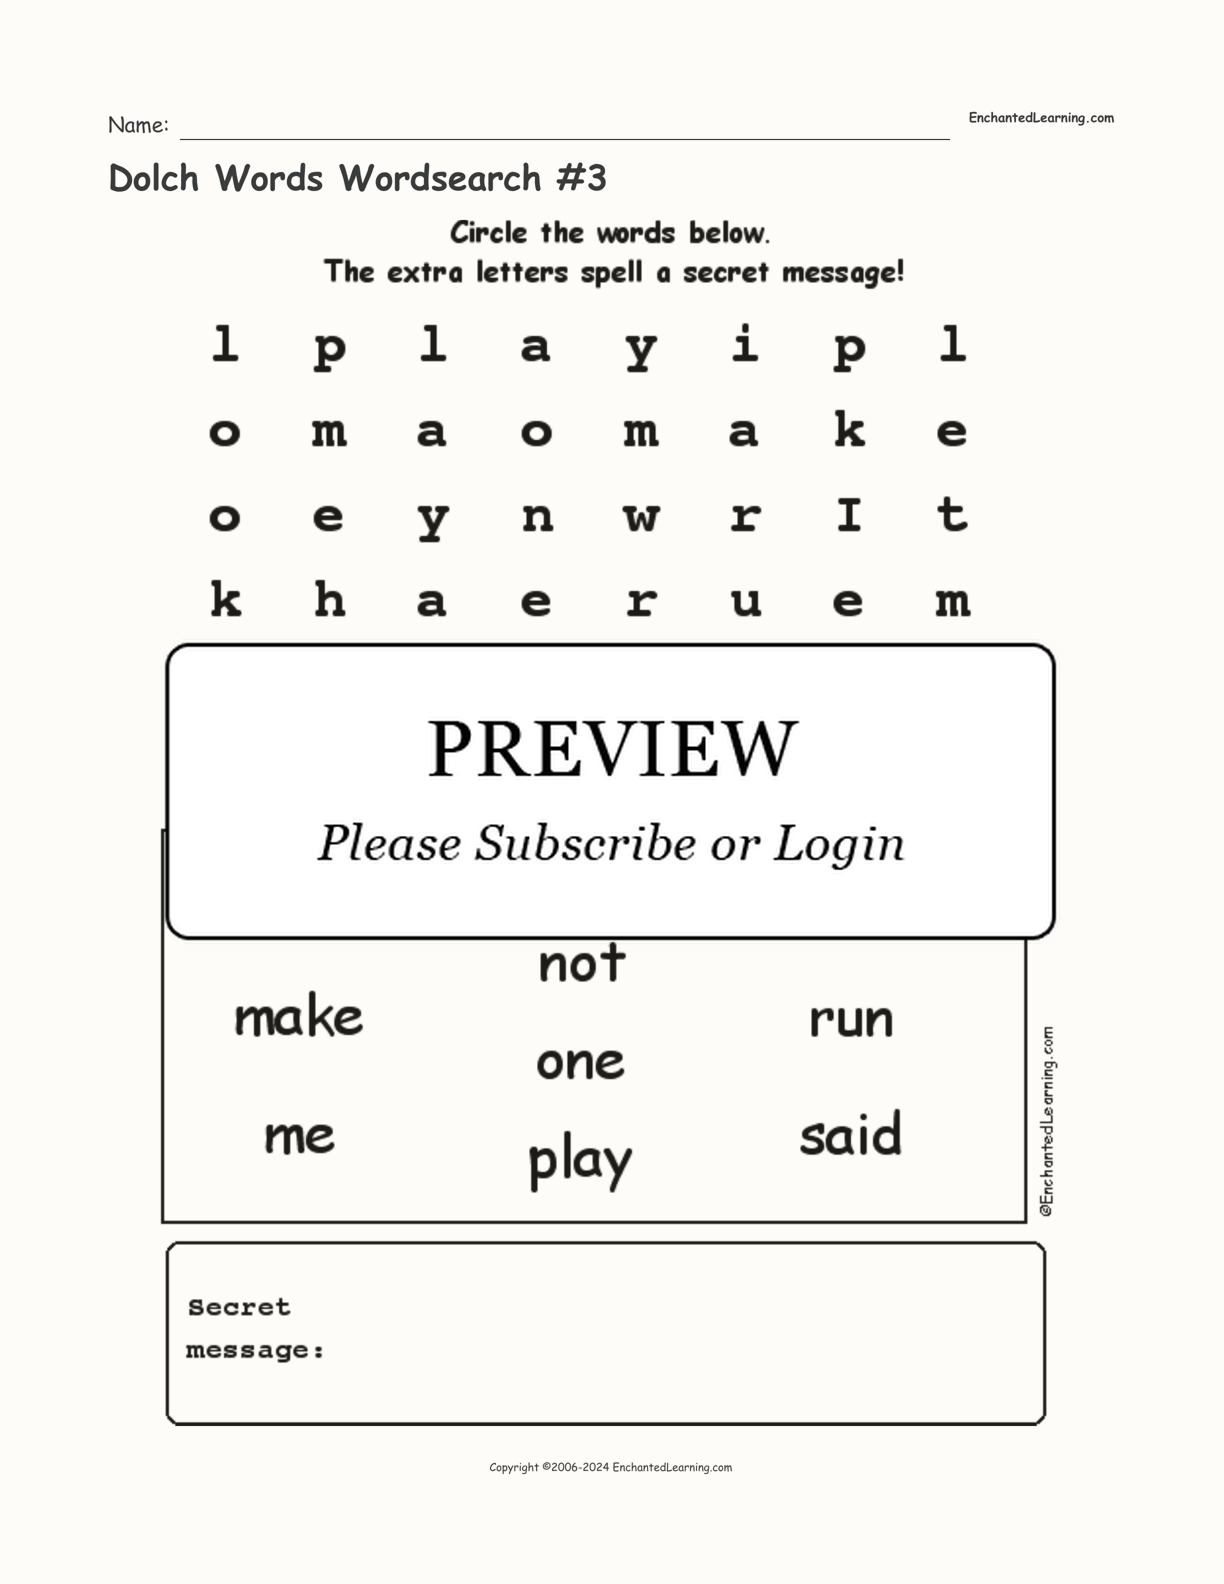 Dolch Words Wordsearch #3 interactive worksheet page 1